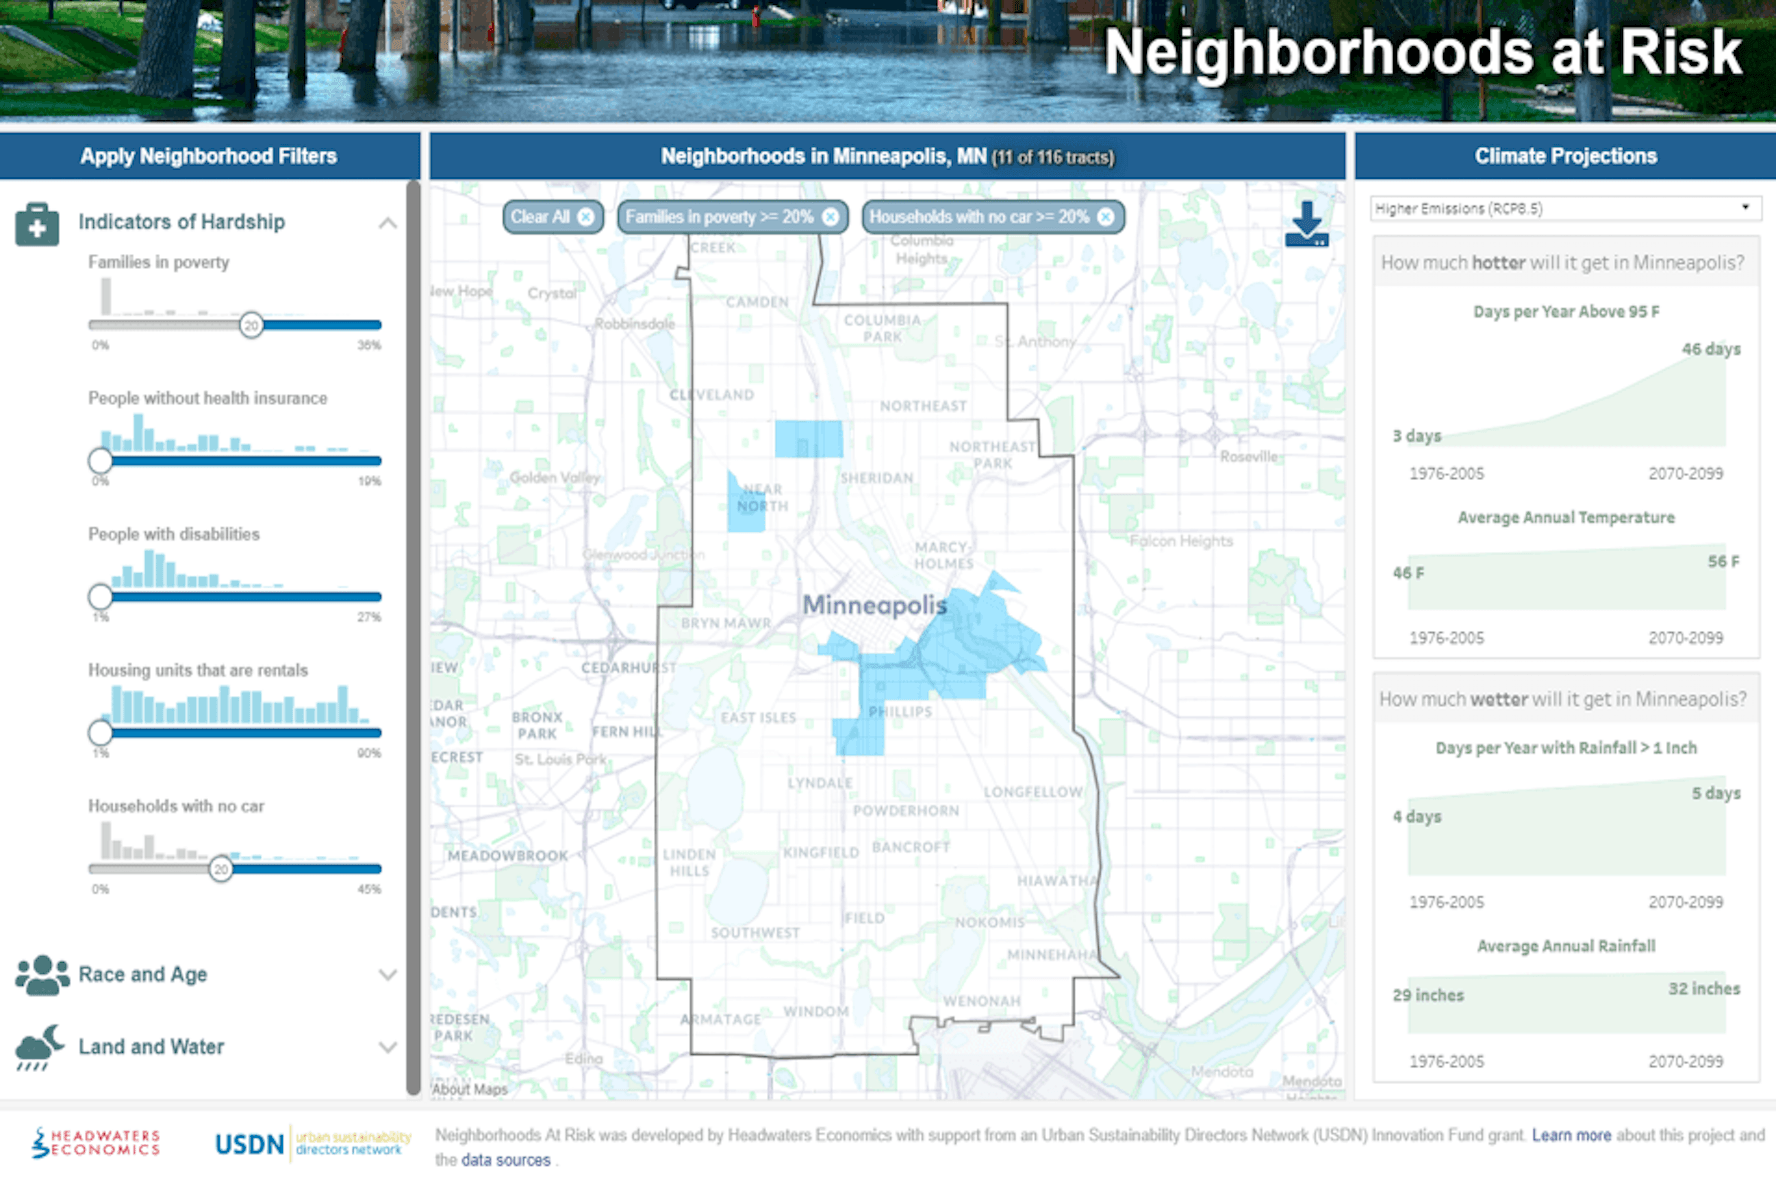 Navigate to A neighborhood-level view of climate change